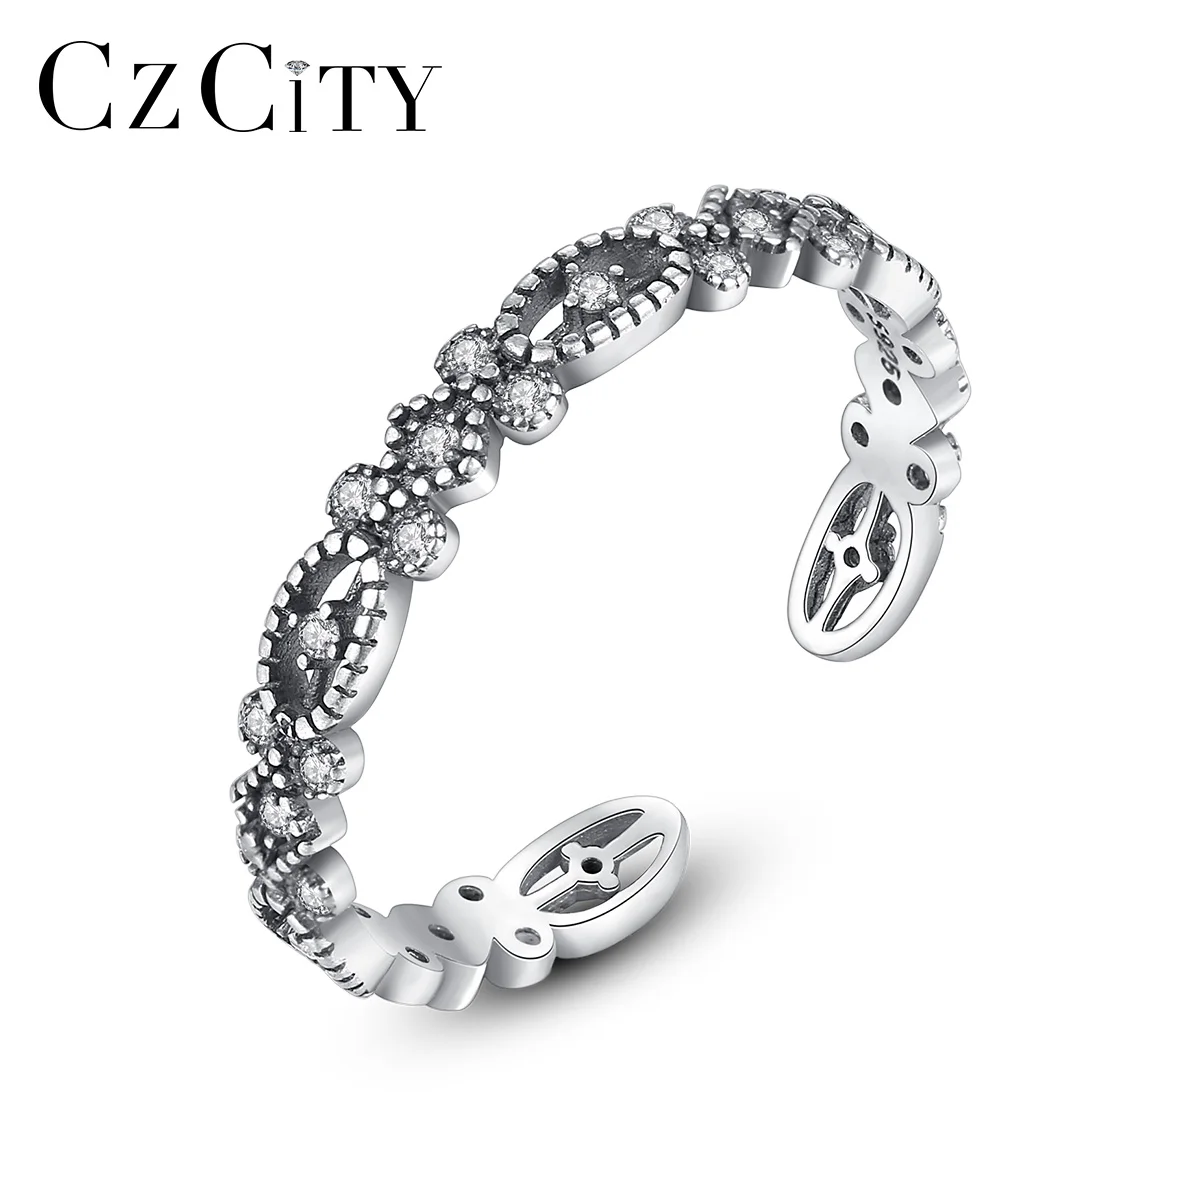 

CZCITY New Design Vintage Tai Silver Rings Mini CZ Pave Antique Engagement Rings For Women Wedding High Quality Gift